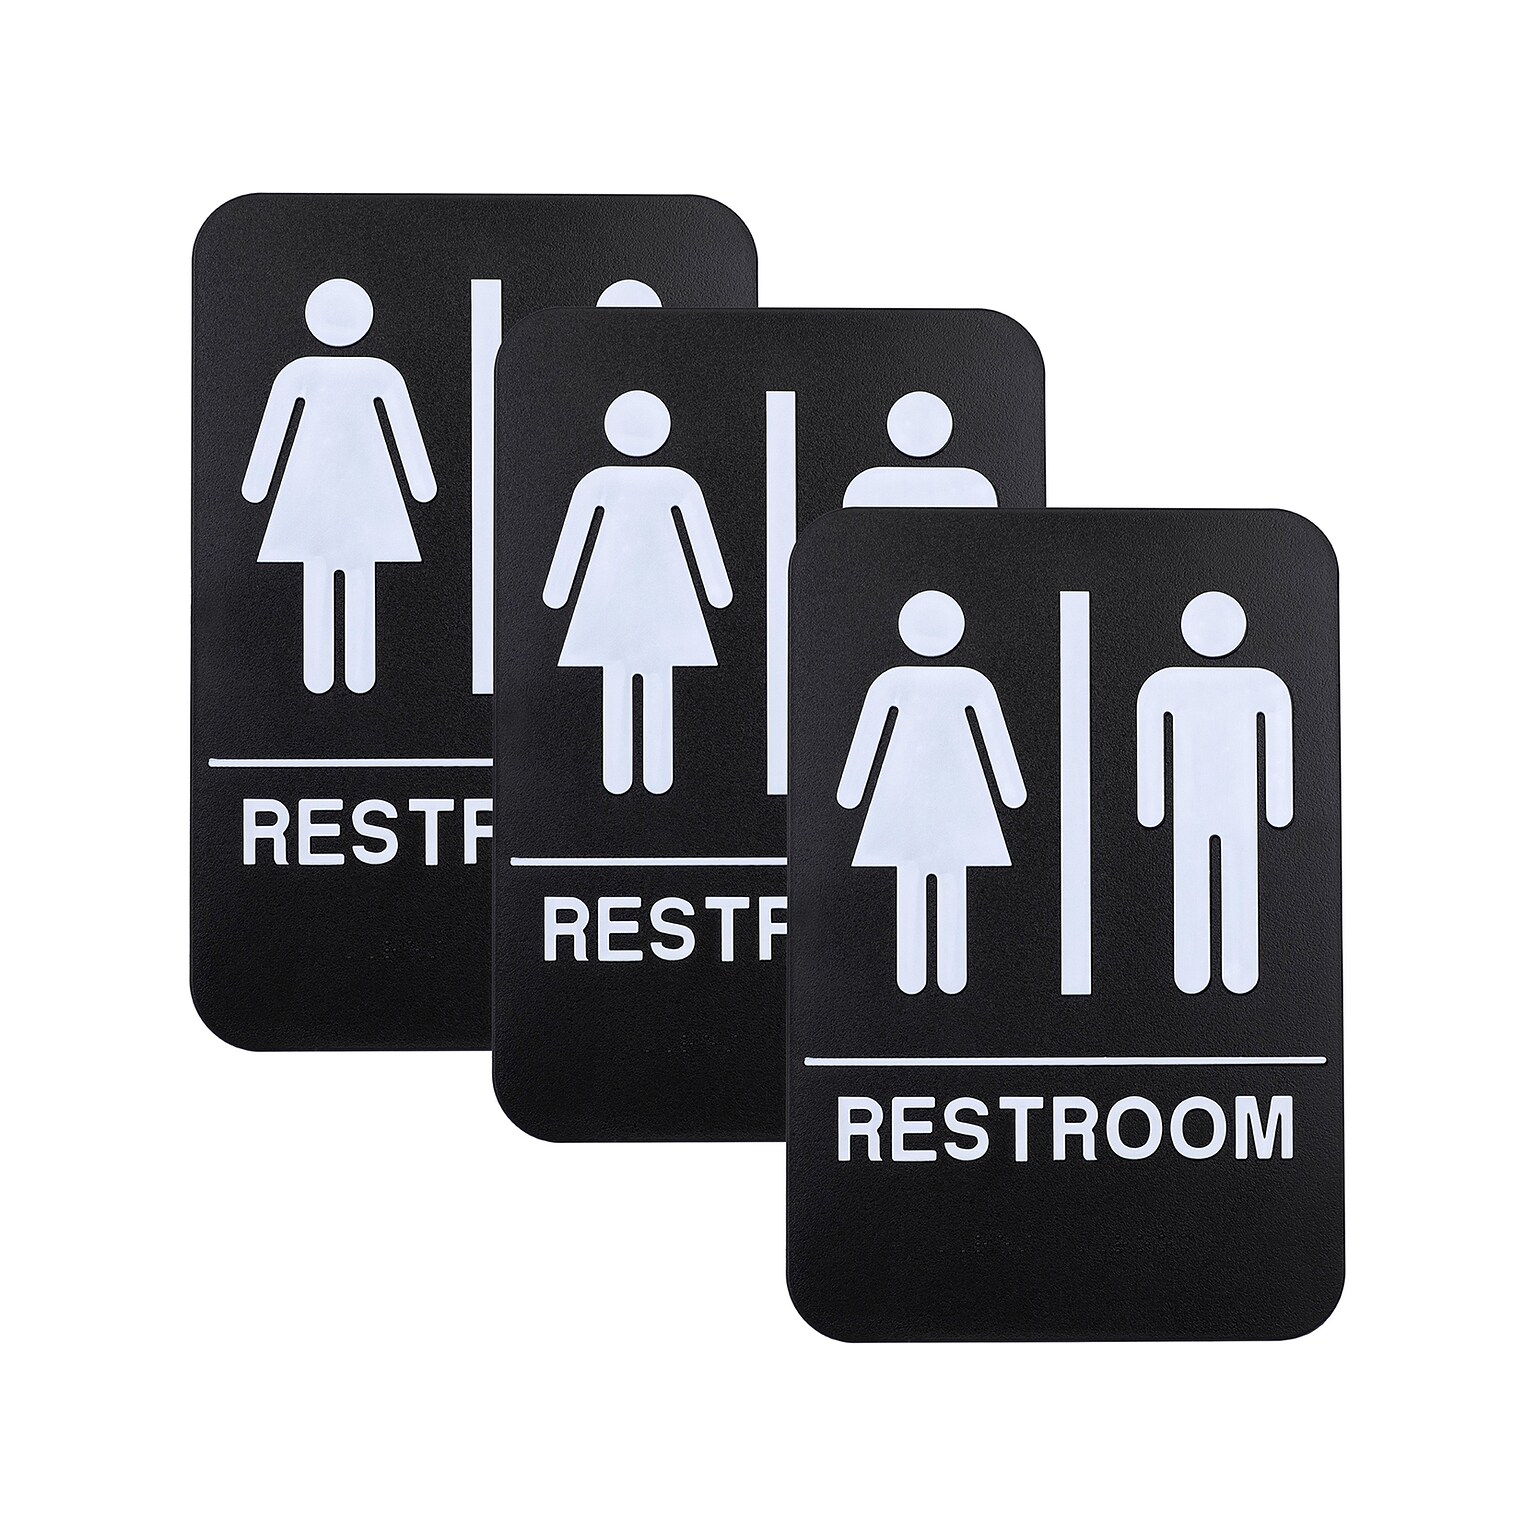 Excello Global Products Indoor/Outdoor Restroom Wall Sign with Braille Text, 6 x 9, Black/White, 3/Pack (EGP-HD-0275-S)